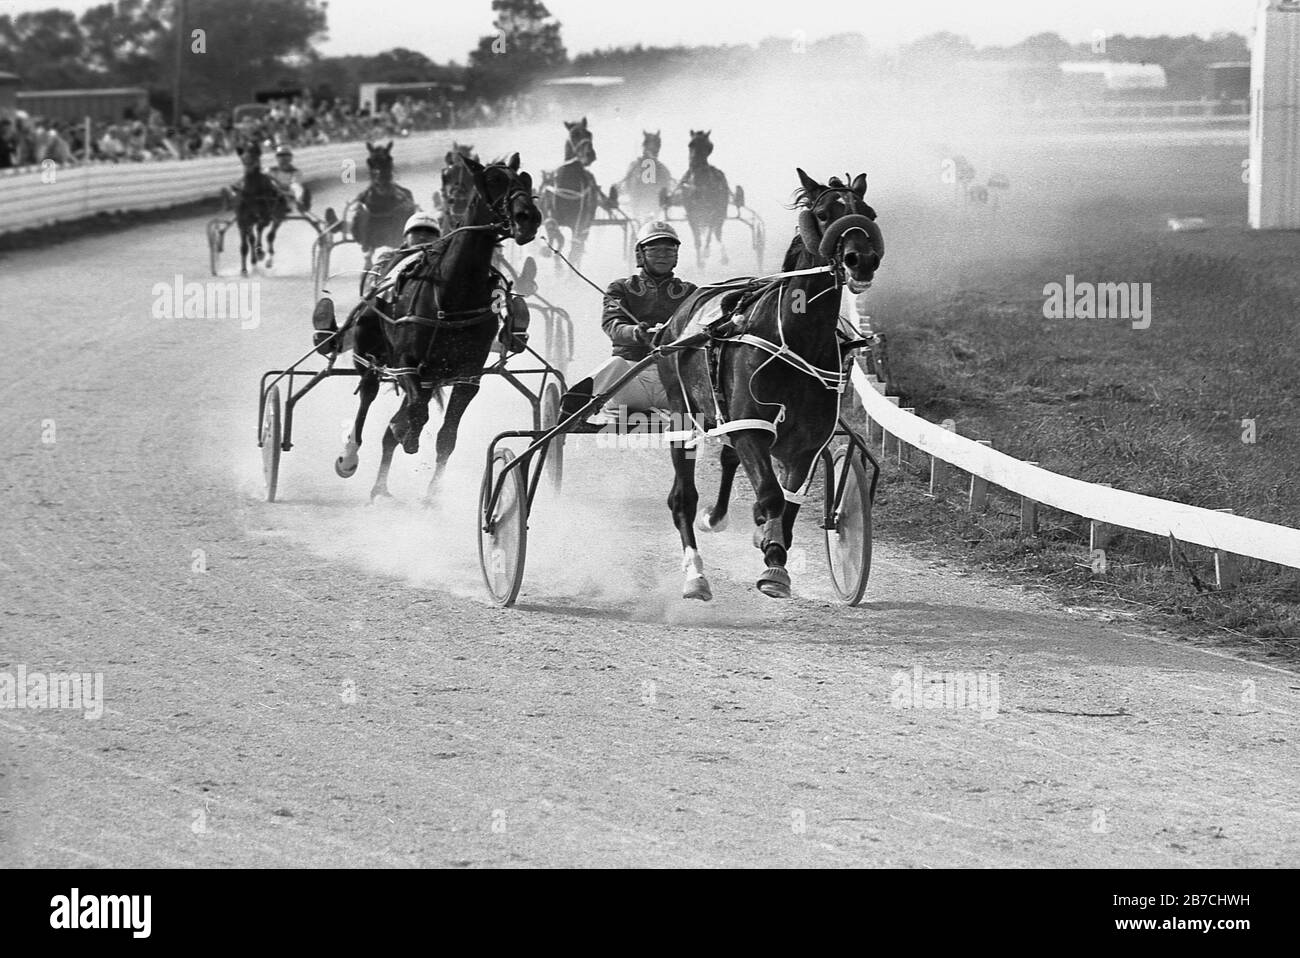 1980s, historical, harness racing or sometimes known as pony and trap racing, picture shows competitoes riding 'sulky's', a small two-wheeled cart attached to a horse, England, UK. Stock Photo